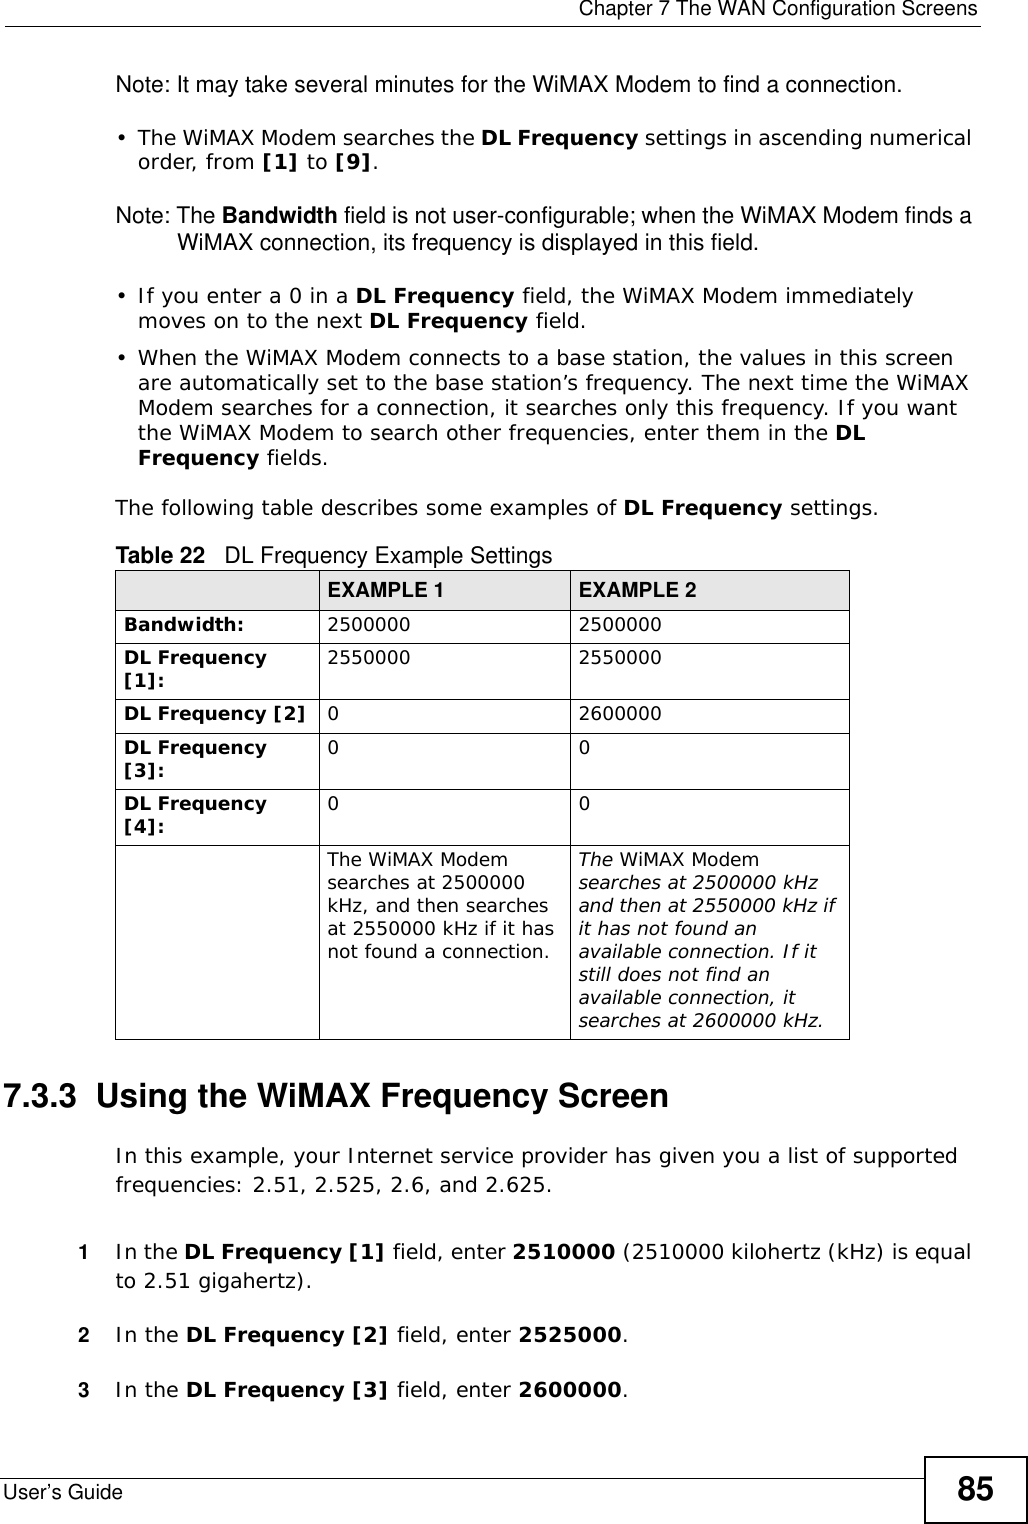  Chapter 7 The WAN Configuration ScreensUser’s Guide 85Note: It may take several minutes for the WiMAX Modem to find a connection.• The WiMAX Modem searches the DL Frequency settings in ascending numerical order, from [1] to [9].Note: The Bandwidth field is not user-configurable; when the WiMAX Modem finds a WiMAX connection, its frequency is displayed in this field.• If you enter a 0 in a DL Frequency field, the WiMAX Modem immediately moves on to the next DL Frequency field.• When the WiMAX Modem connects to a base station, the values in this screen are automatically set to the base station’s frequency. The next time the WiMAX Modem searches for a connection, it searches only this frequency. If you want the WiMAX Modem to search other frequencies, enter them in the DL Frequency fields.The following table describes some examples of DL Frequency settings.7.3.3  Using the WiMAX Frequency ScreenIn this example, your Internet service provider has given you a list of supported frequencies: 2.51, 2.525, 2.6, and 2.625. 1In the DL Frequency [1] field, enter 2510000 (2510000 kilohertz (kHz) is equal to 2.51 gigahertz).2In the DL Frequency [2] field, enter 2525000.3In the DL Frequency [3] field, enter 2600000.Table 22   DL Frequency Example SettingsEXAMPLE 1 EXAMPLE 2Bandwidth: 2500000 2500000DL Frequency [1]: 2550000 2550000DL Frequency [2] 0 2600000DL Frequency [3]: 00DL Frequency [4]: 00The WiMAX Modem searches at 2500000 kHz, and then searches at 2550000 kHz if it has not found a connection.The WiMAX Modem searches at 2500000 kHz and then at 2550000 kHz if it has not found an available connection. If it still does not find an available connection, it searches at 2600000 kHz.